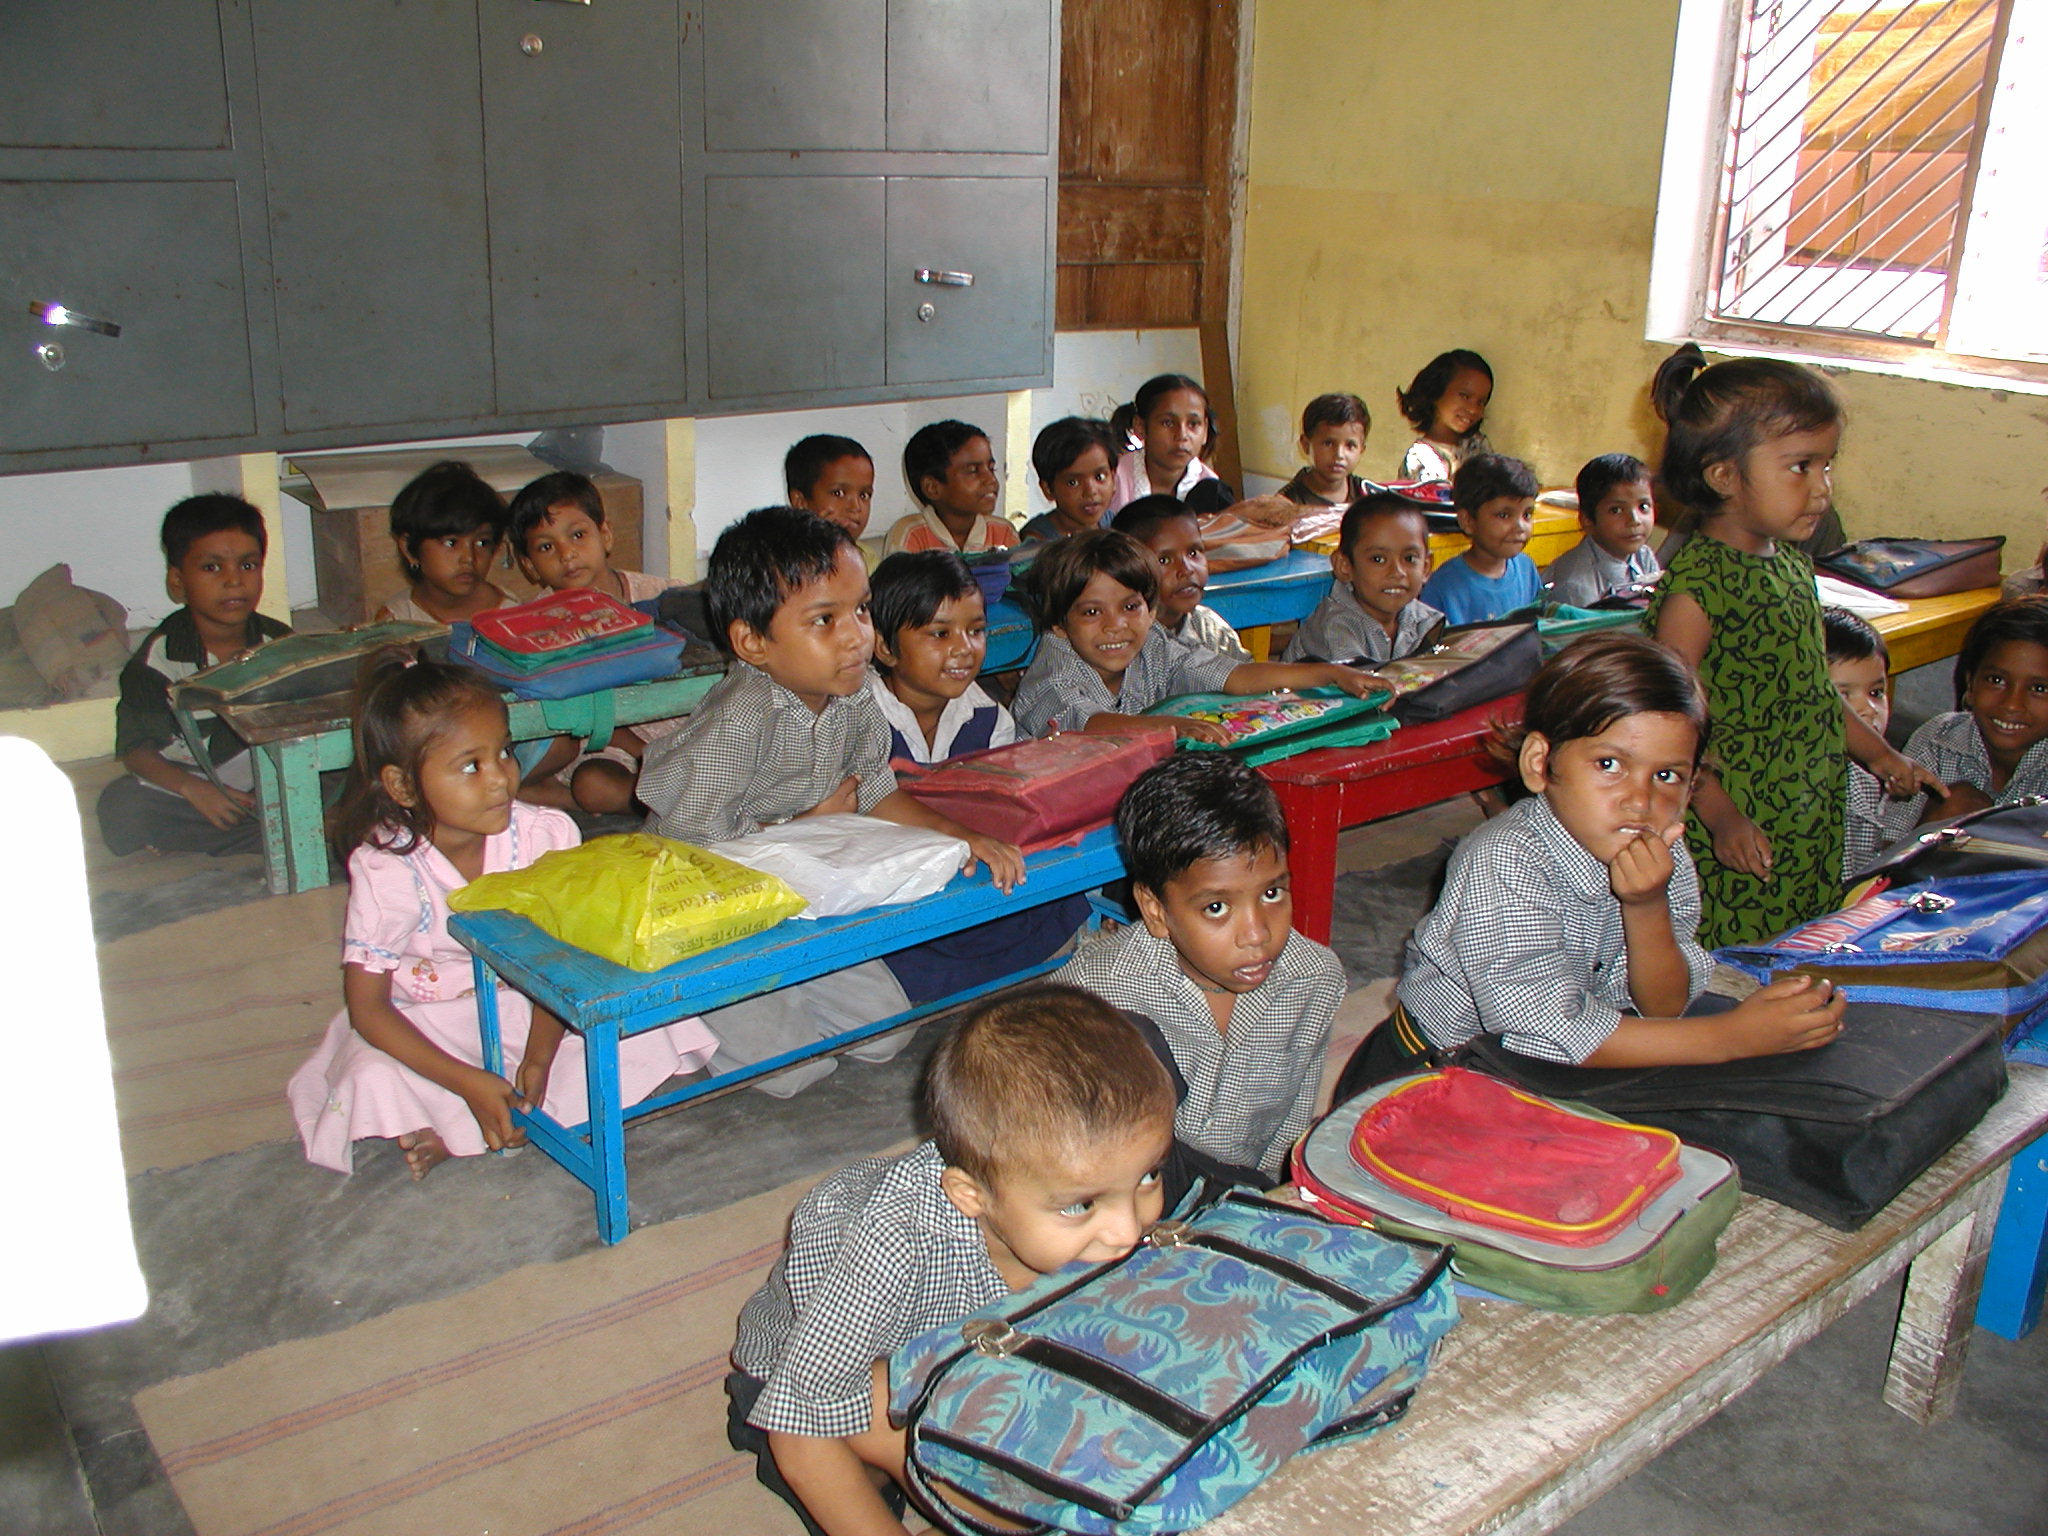 A classroom of young children